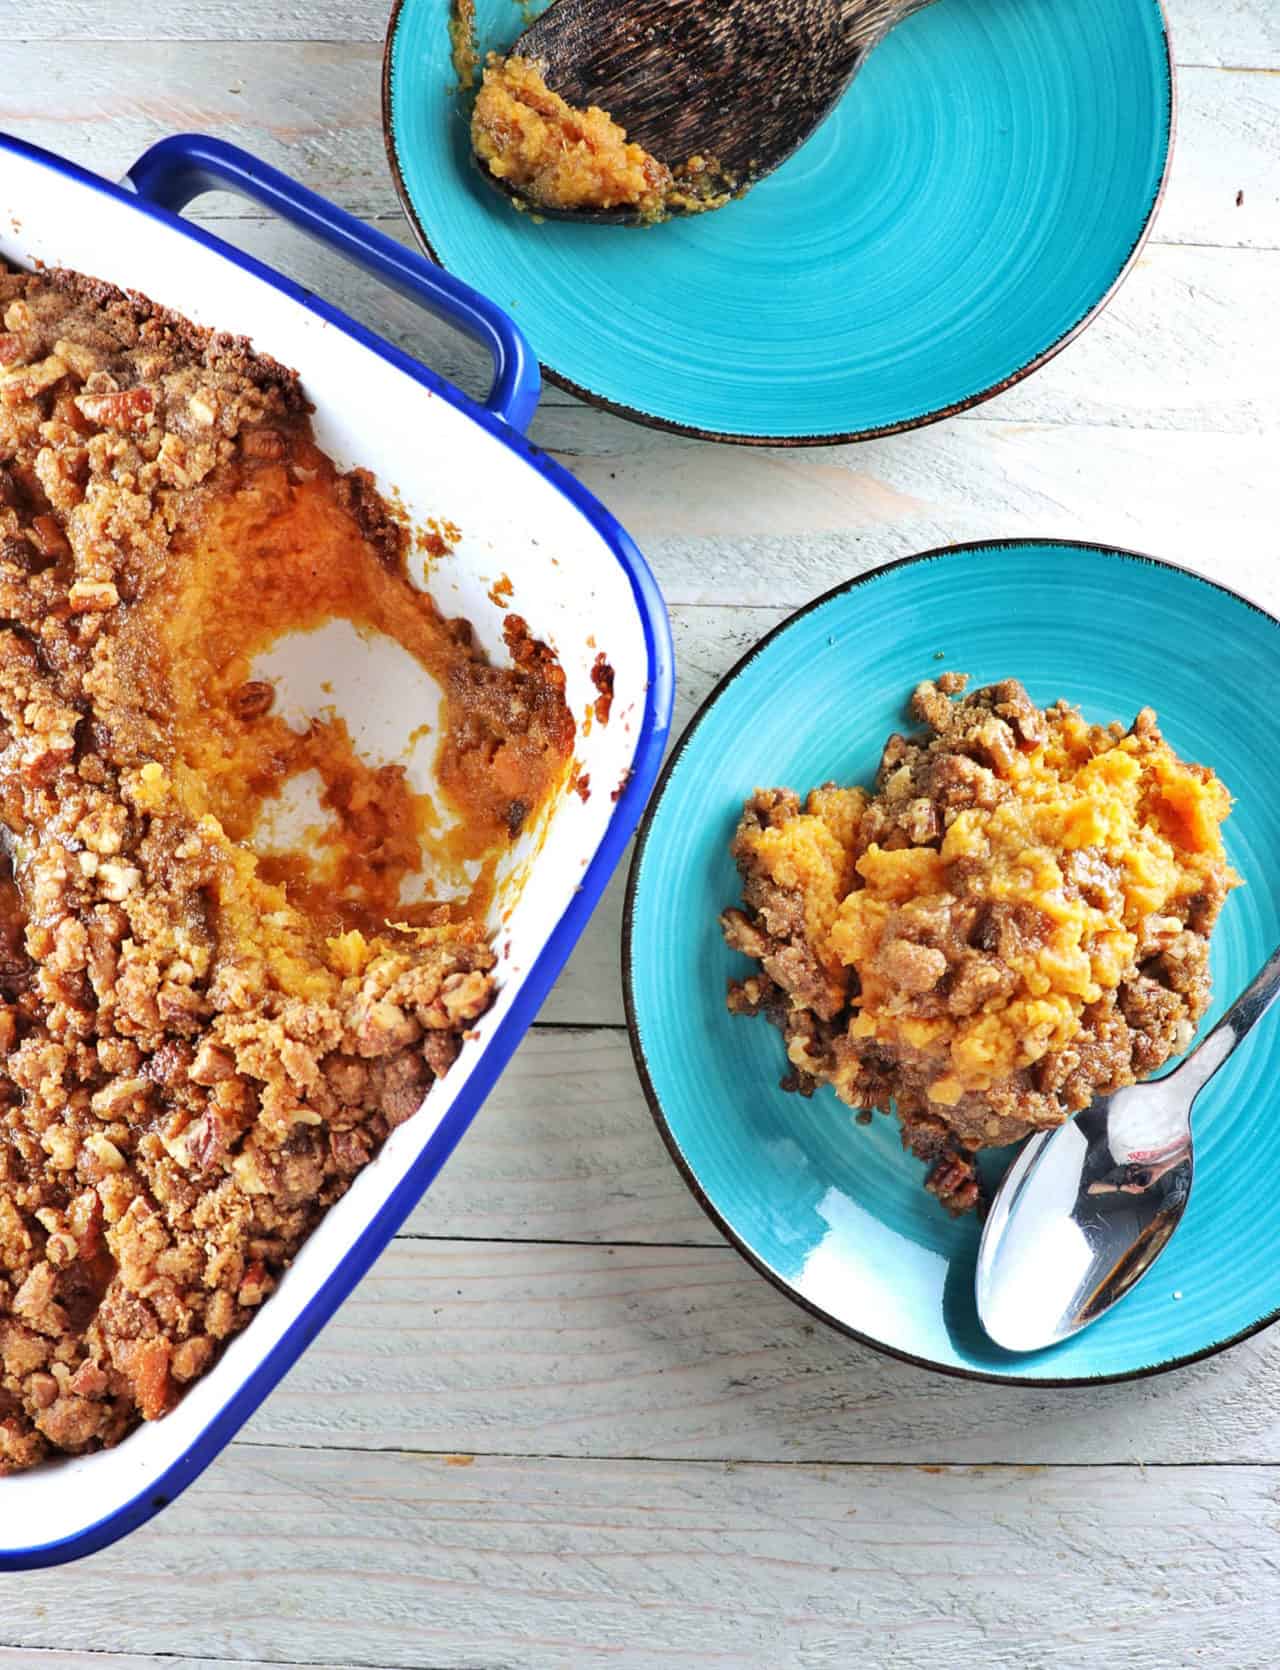 Candied Yam Casserole with Brown Sugar Streusel – Meiko and The Dish